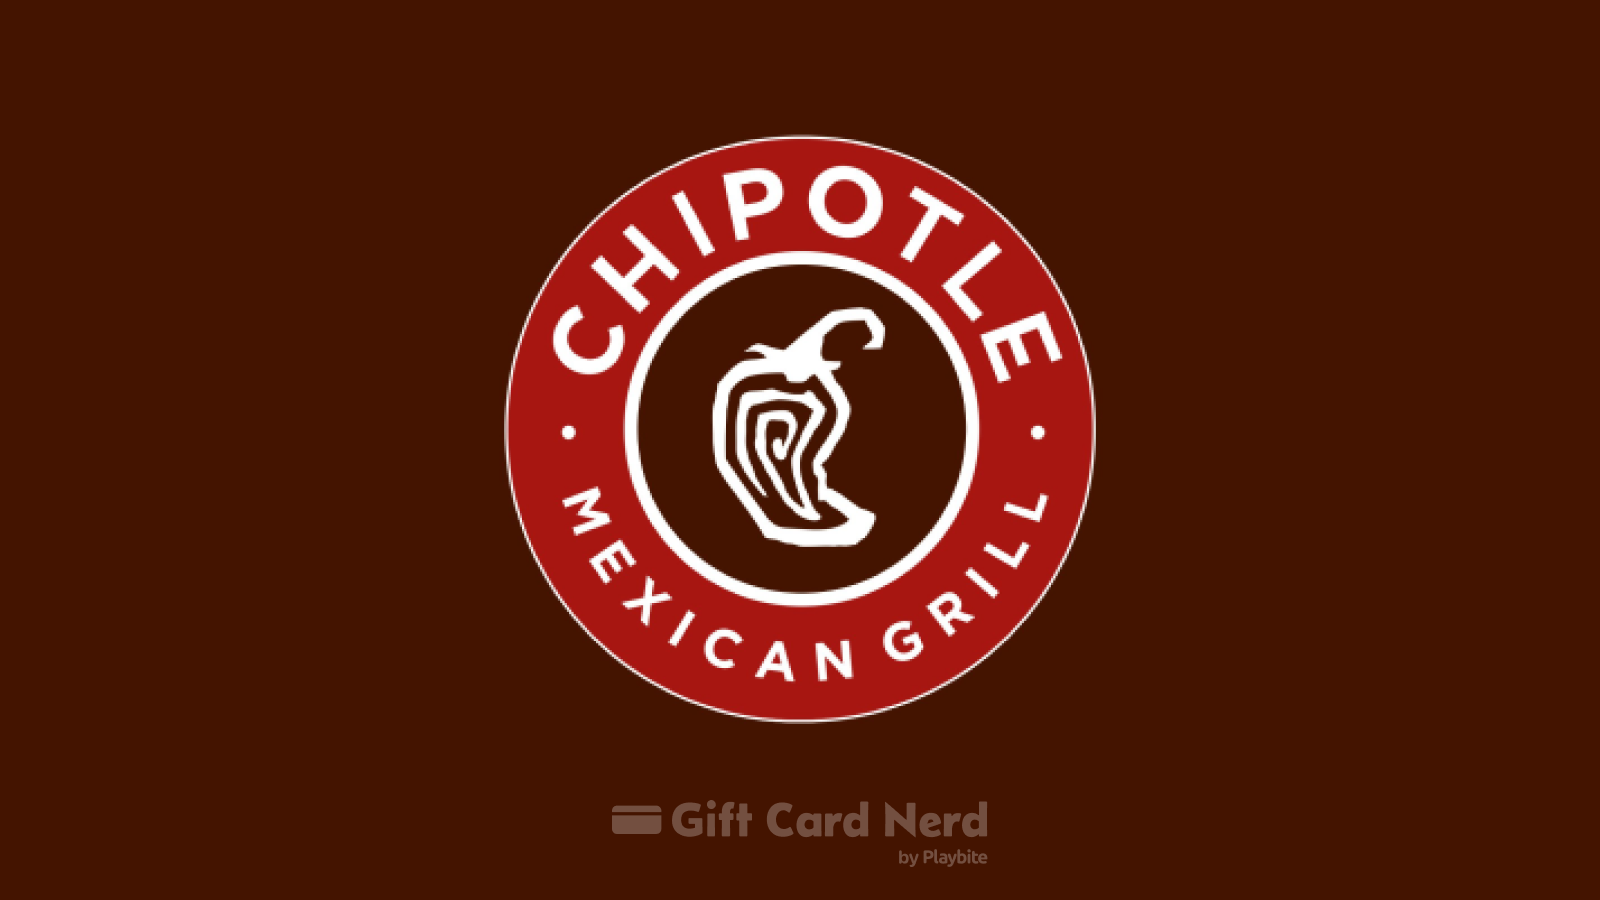 Does Game Stop Sell Chipotle Gift Cards?